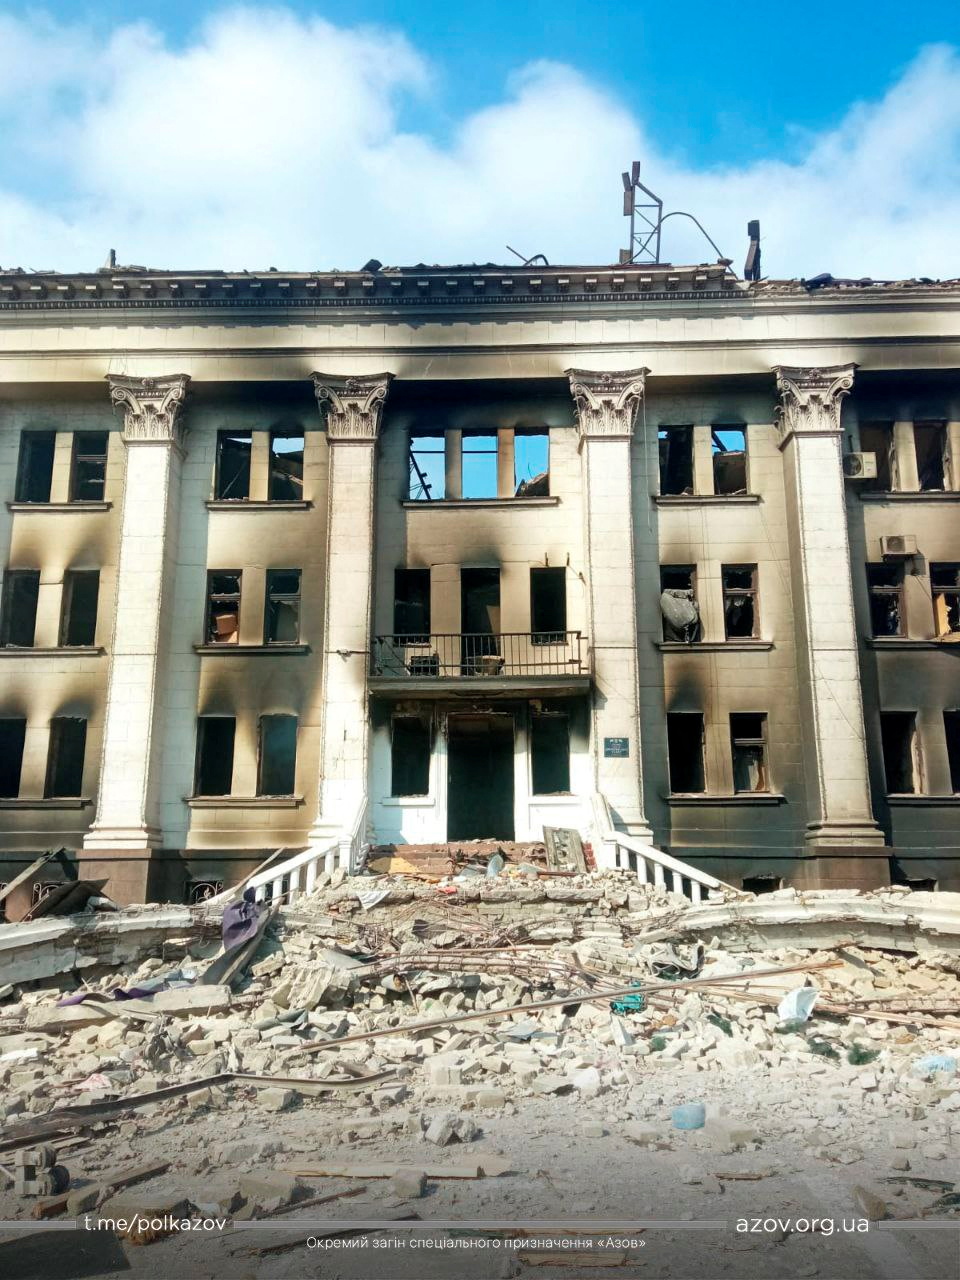 The bombed theater in Mariupol